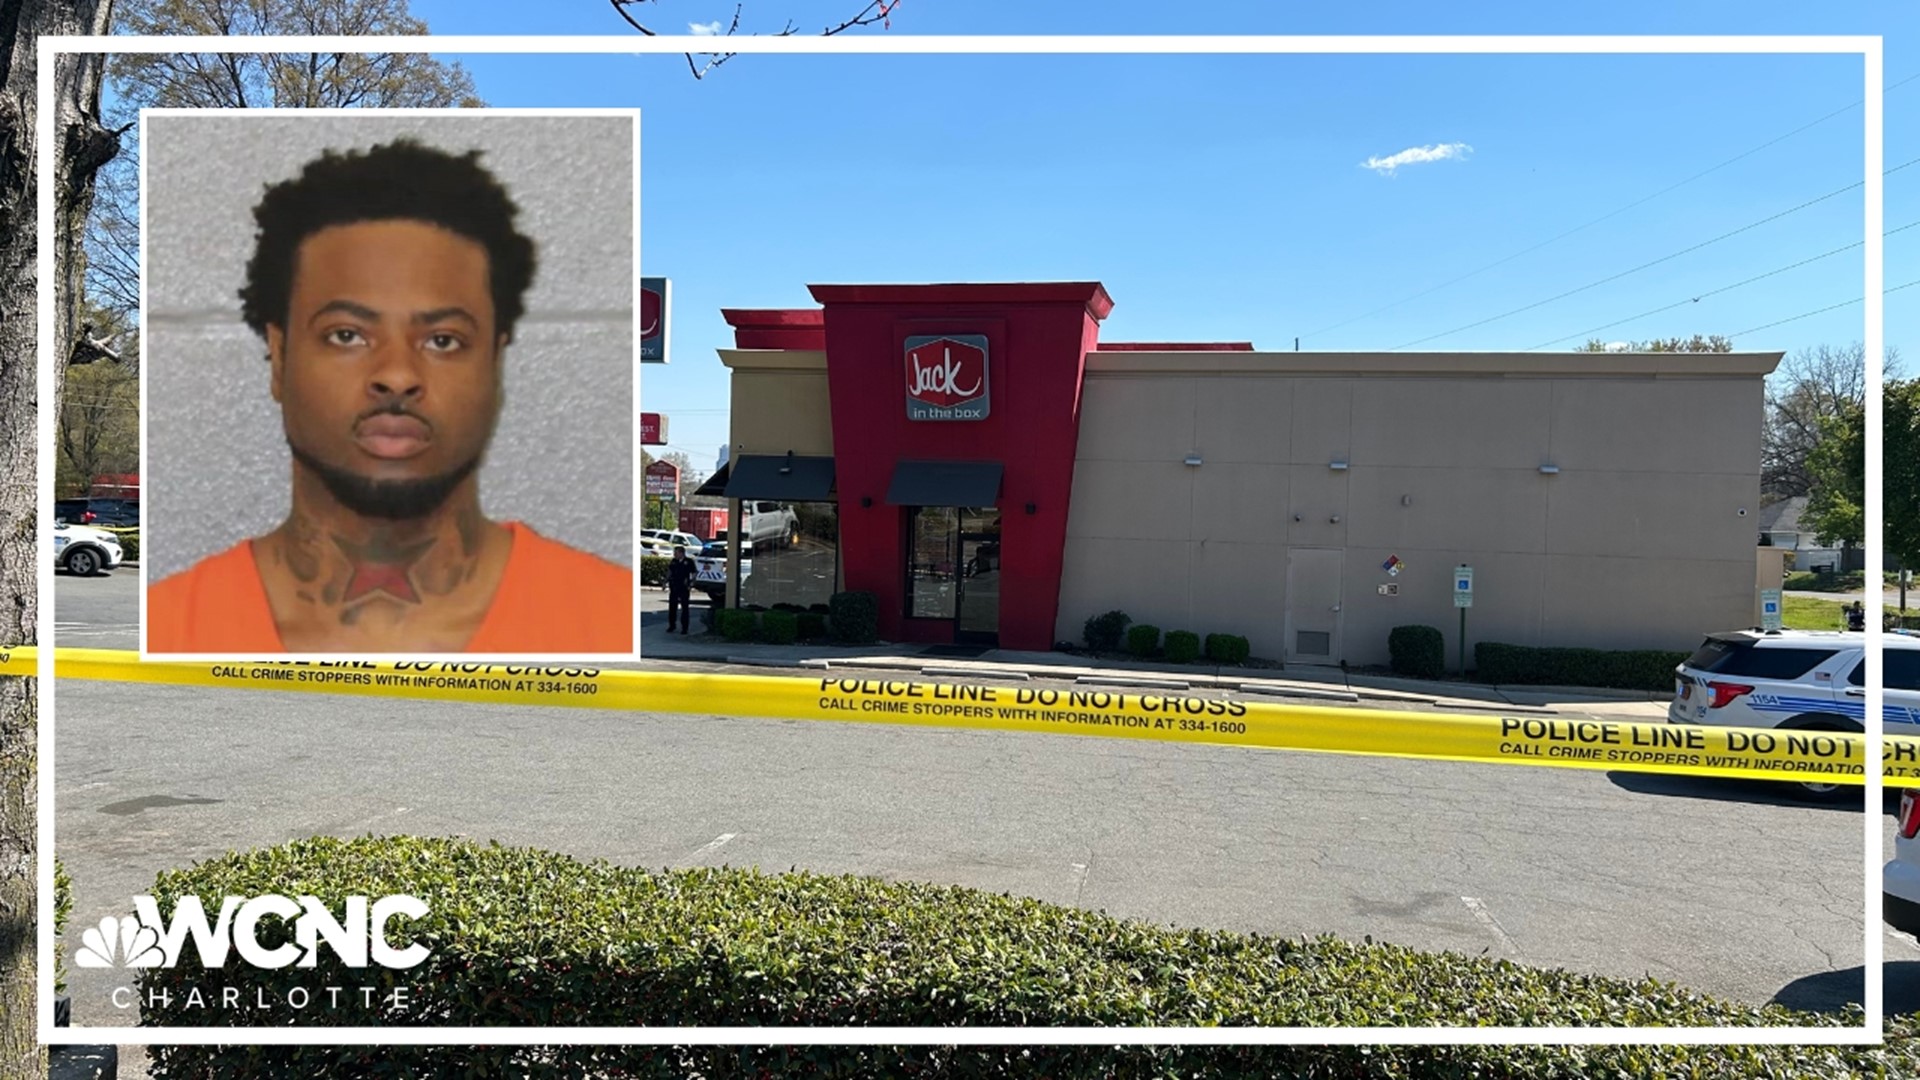 A 17-year-old Jack in the Box employee was killed in northwest Charlotte on Friday afternoon, police said.